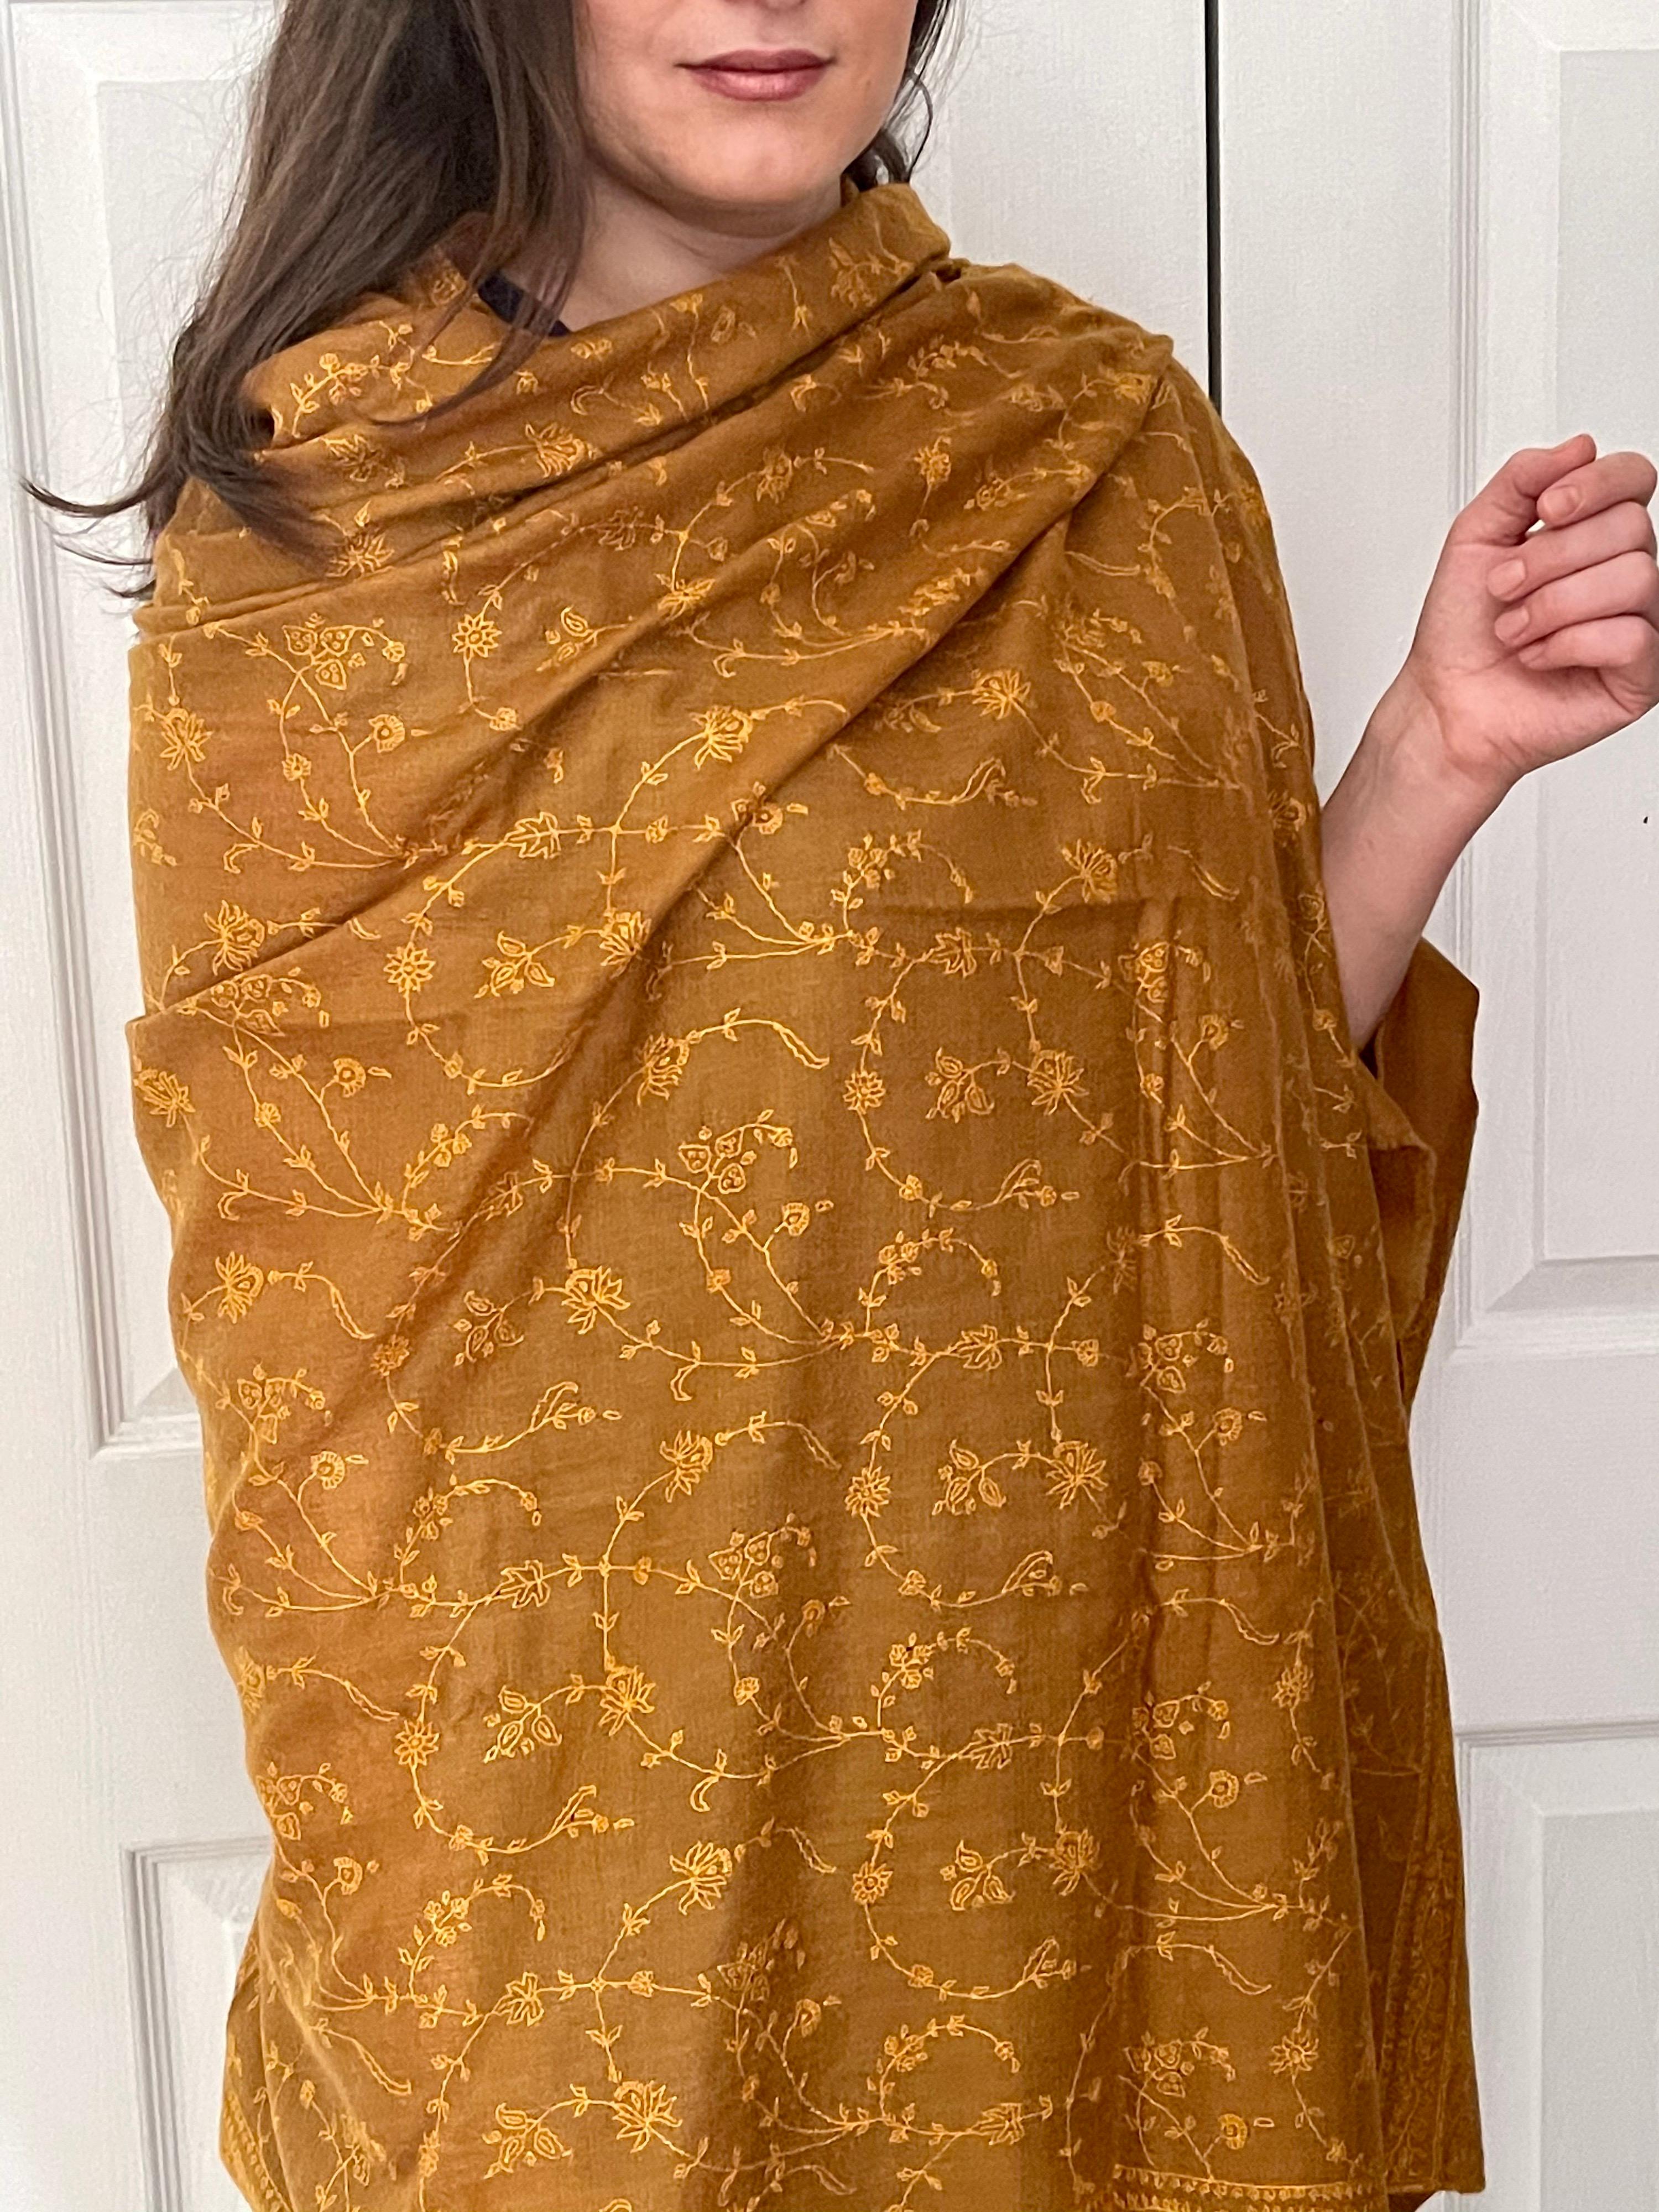 Hand Embroidered 100% Cashmere Pashmina Shawl Golden Brown Made in Kashmir  9